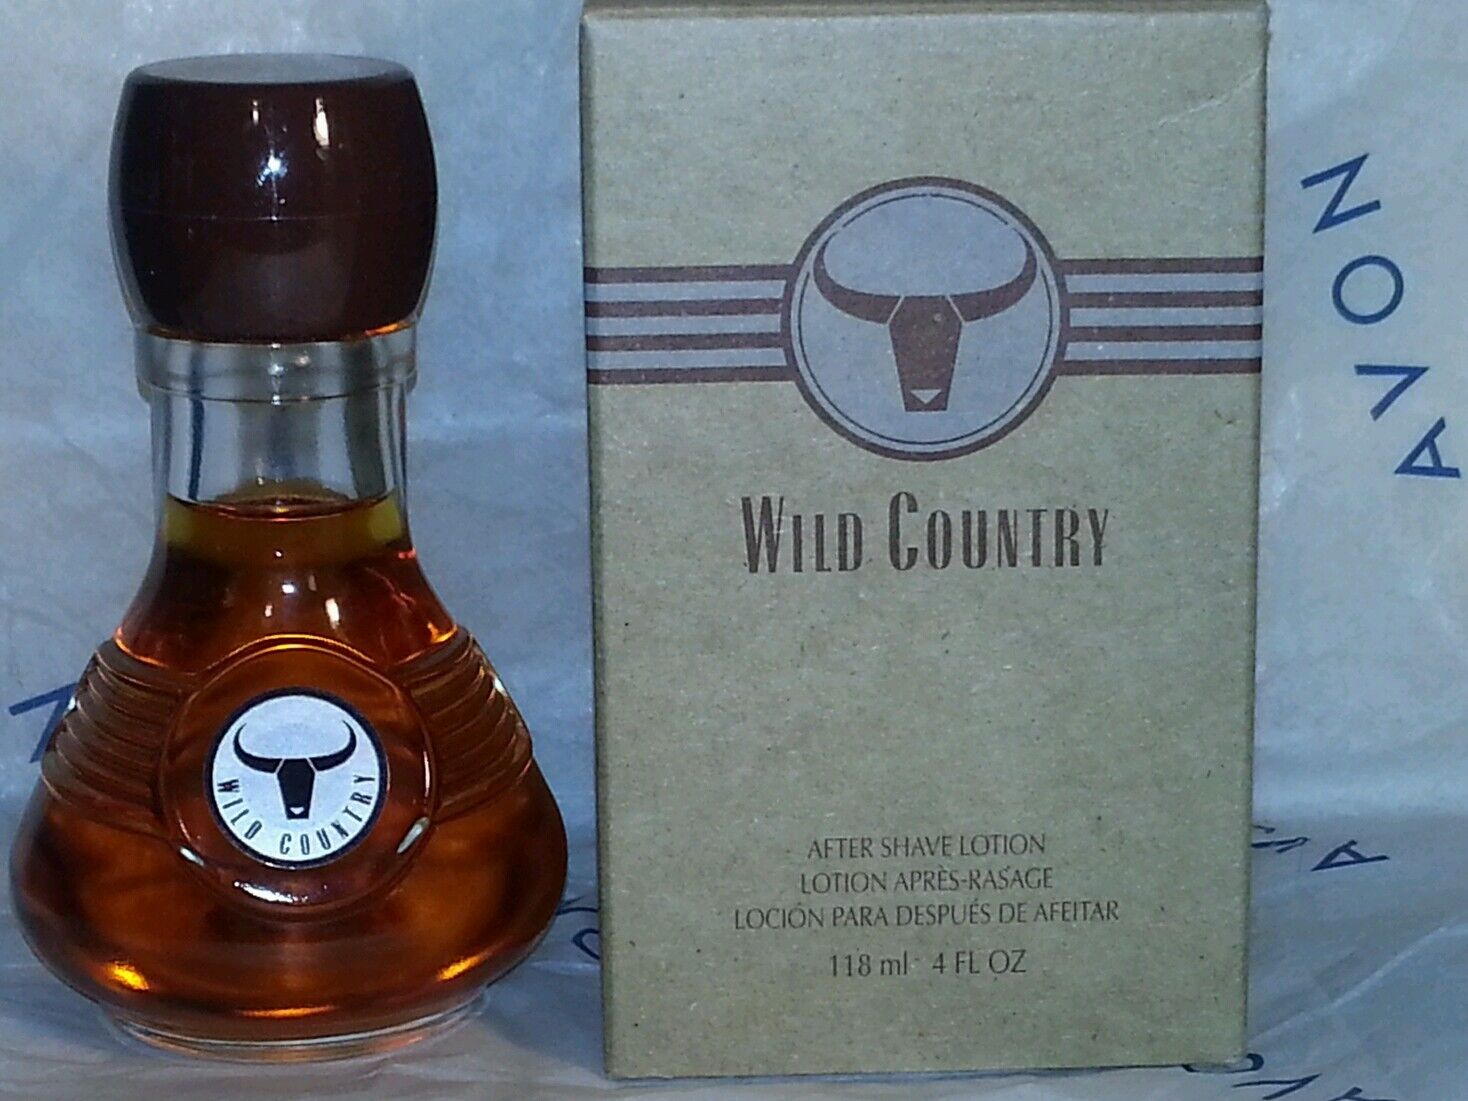 Avon WILD COUNTRY After Shave Lotion 4 fl.oz.